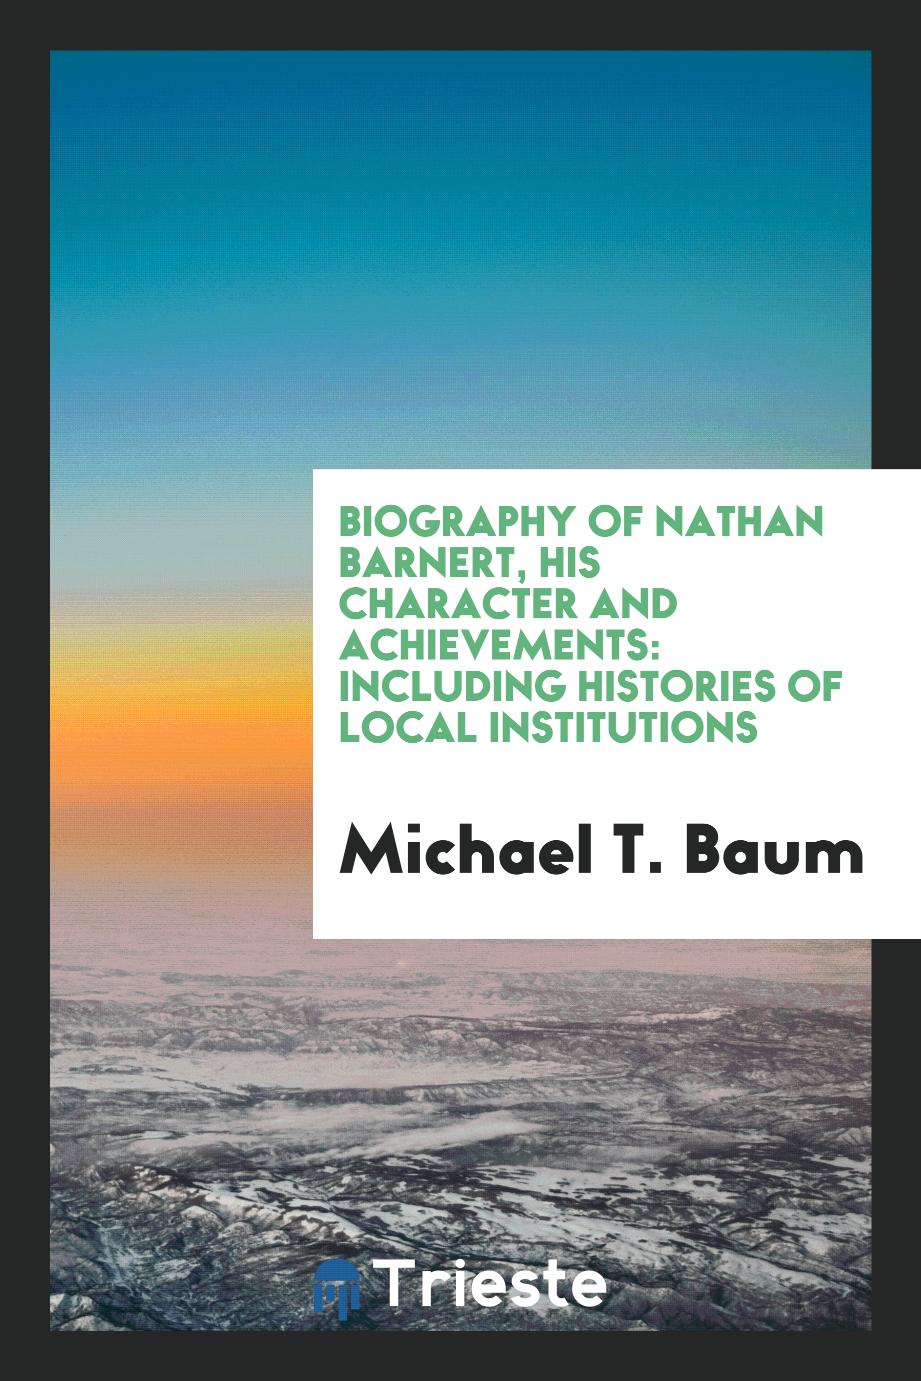 Biography of Nathan Barnert, His Character and Achievements: Including Histories of Local Institutions